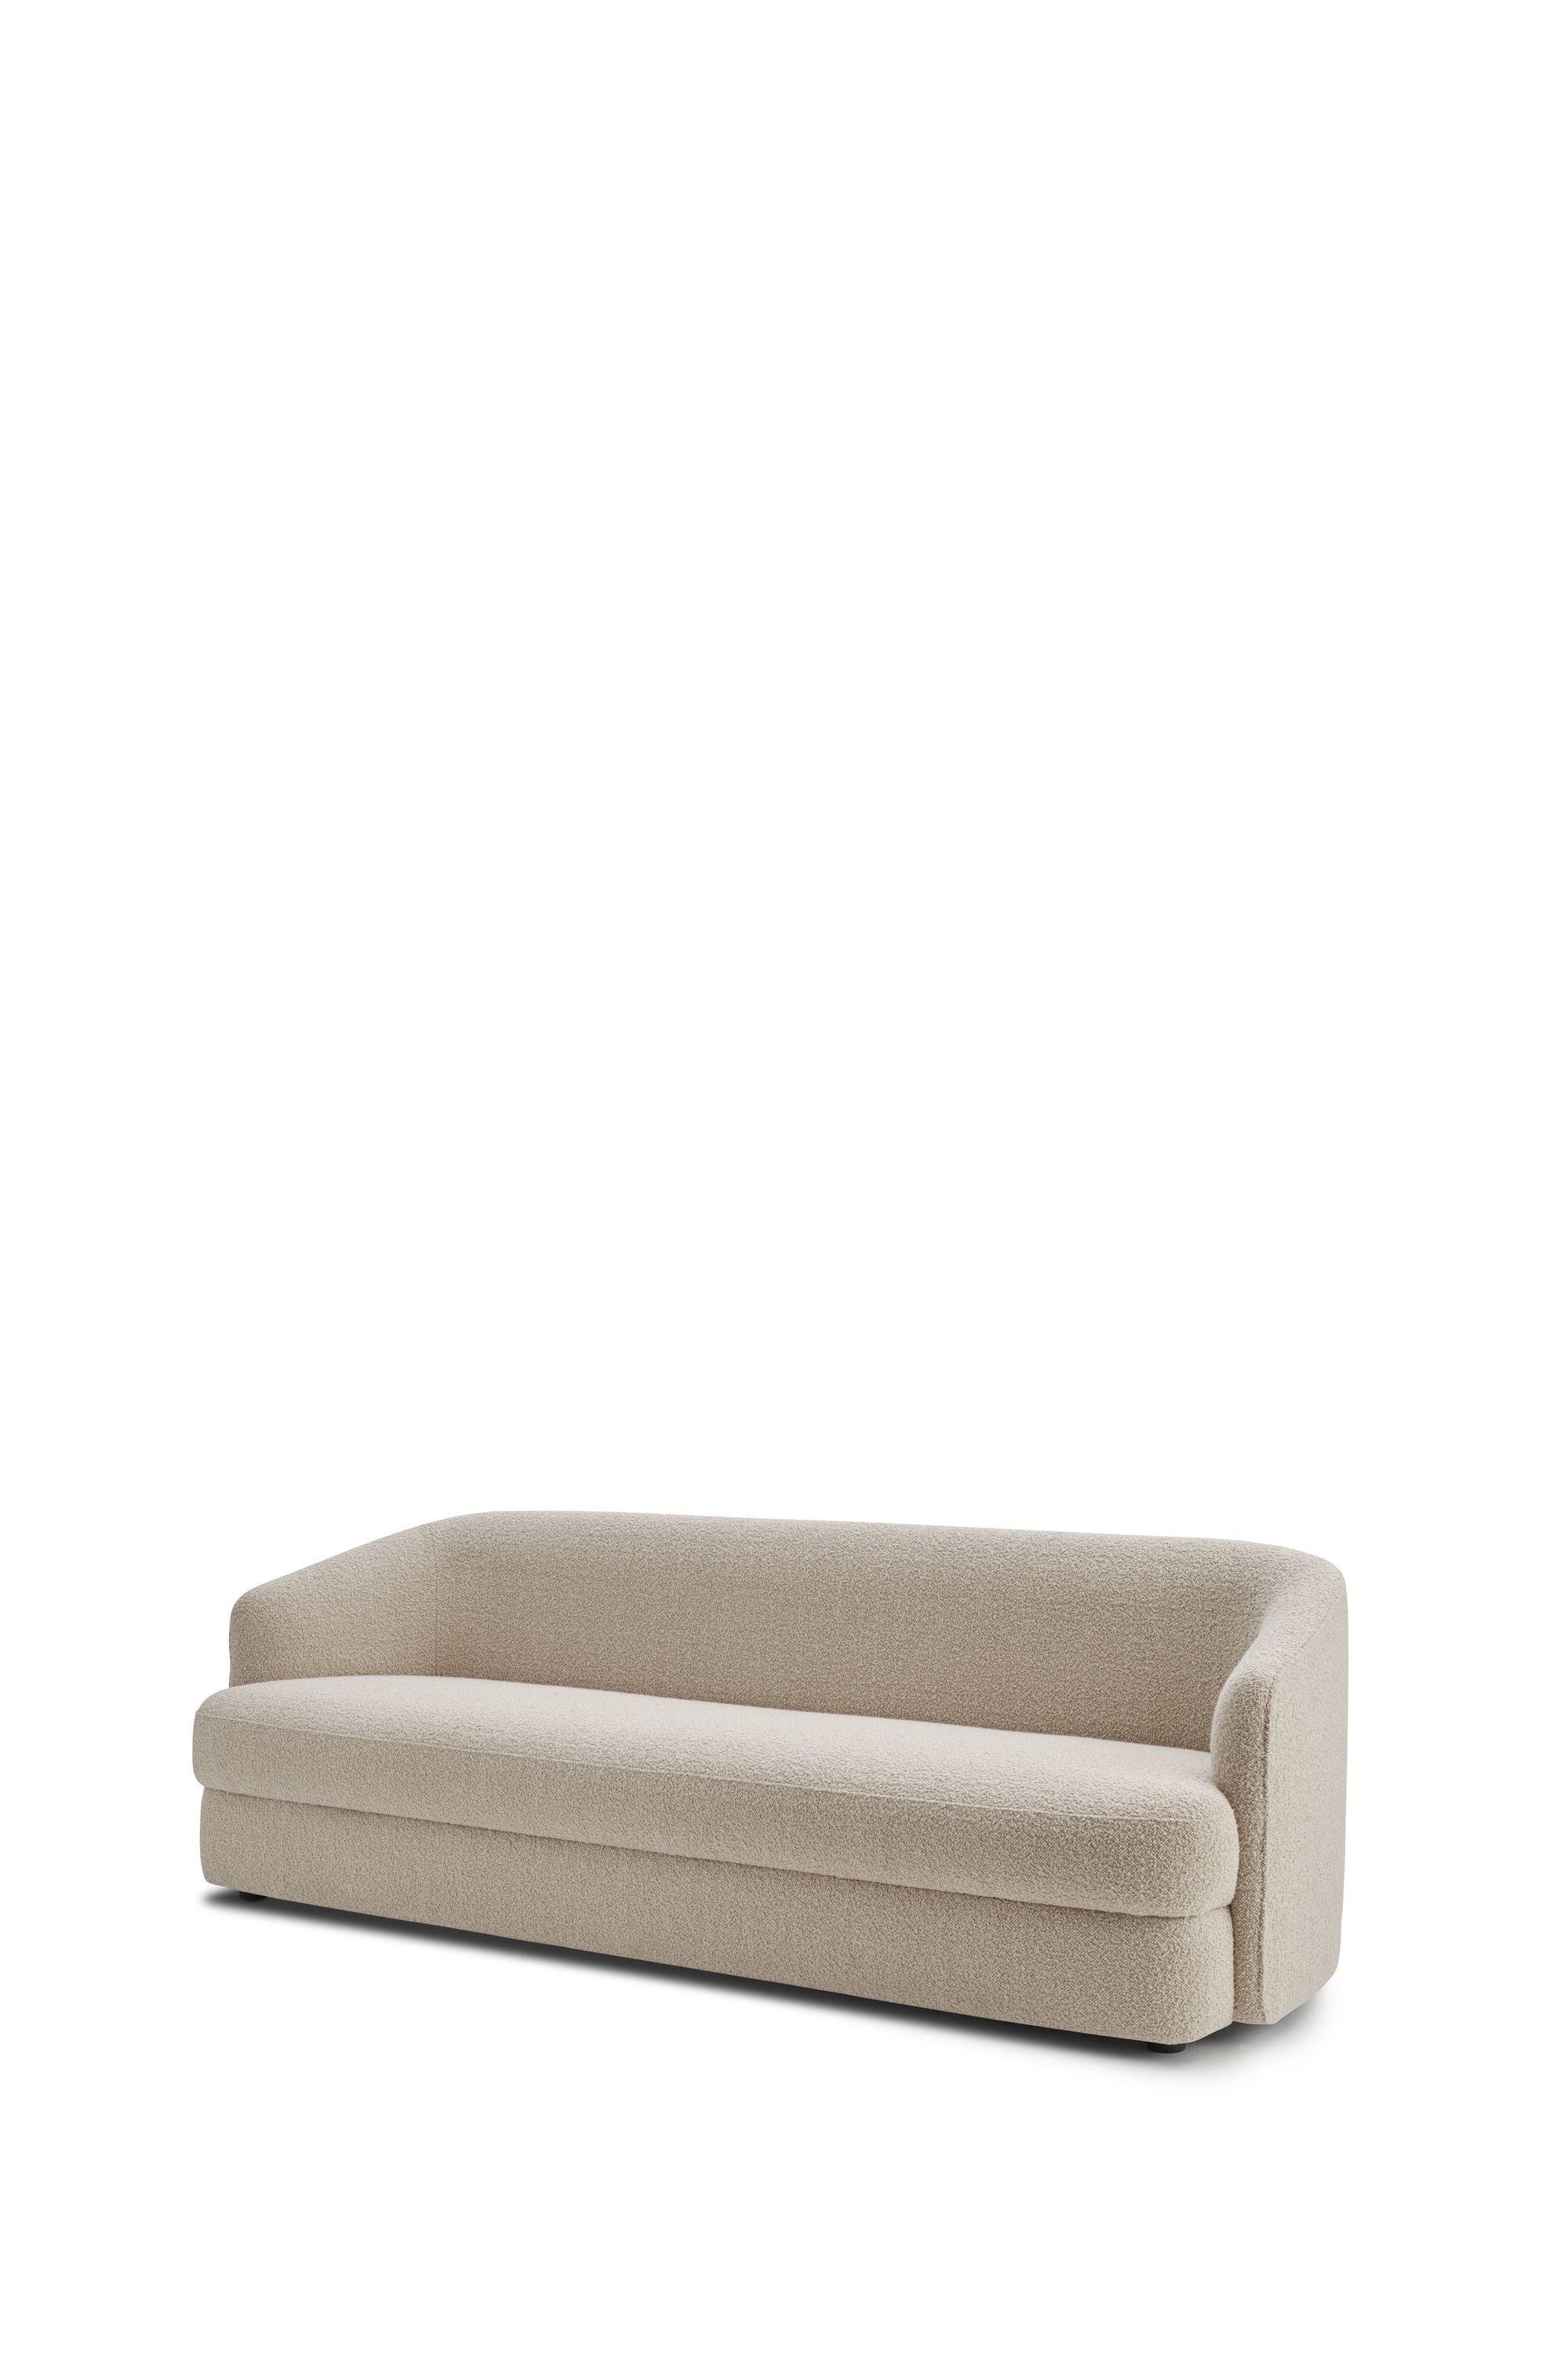 New Works Covent Sofa 3 Seater, Duna 003